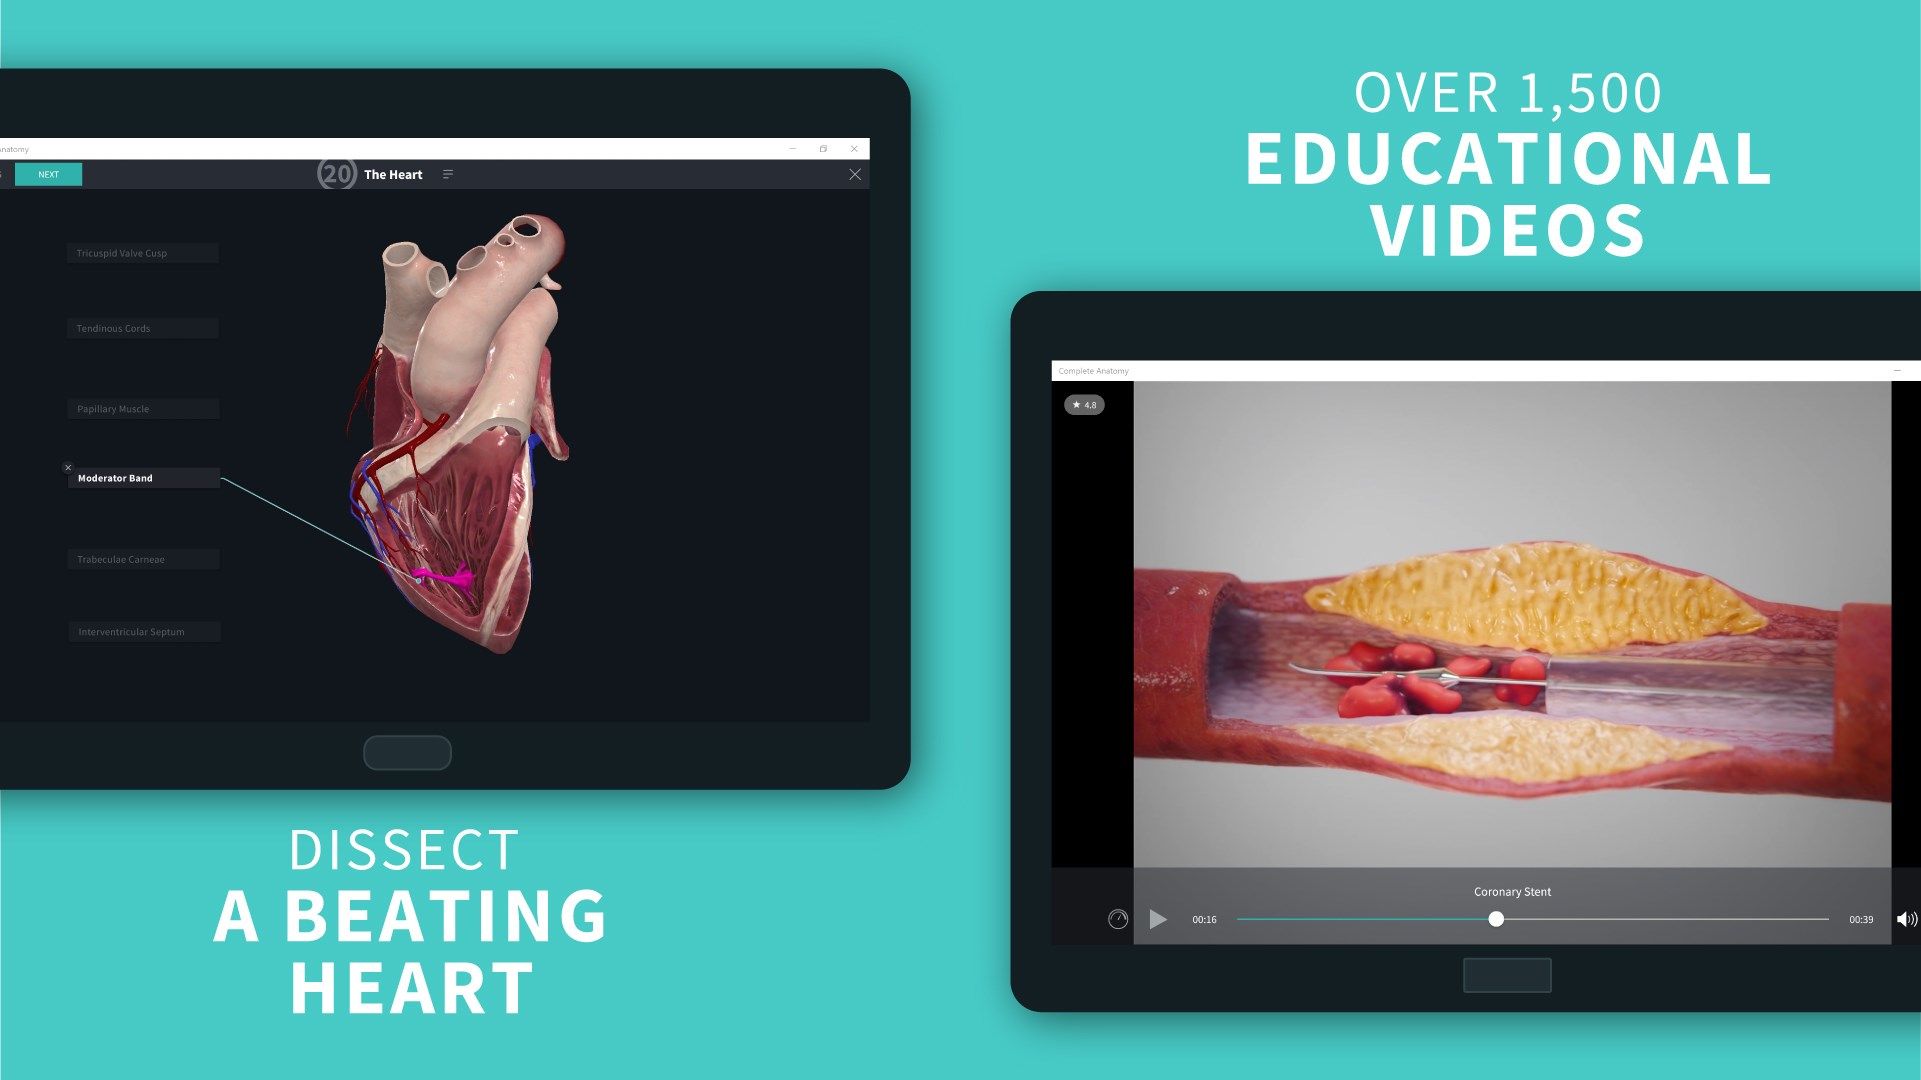 Study a beating human heart in incredible 3D and access over 1,500 videos covering topics in Cardiology, Orthopedics, Ophthalmology, Fitness, and Dentistry